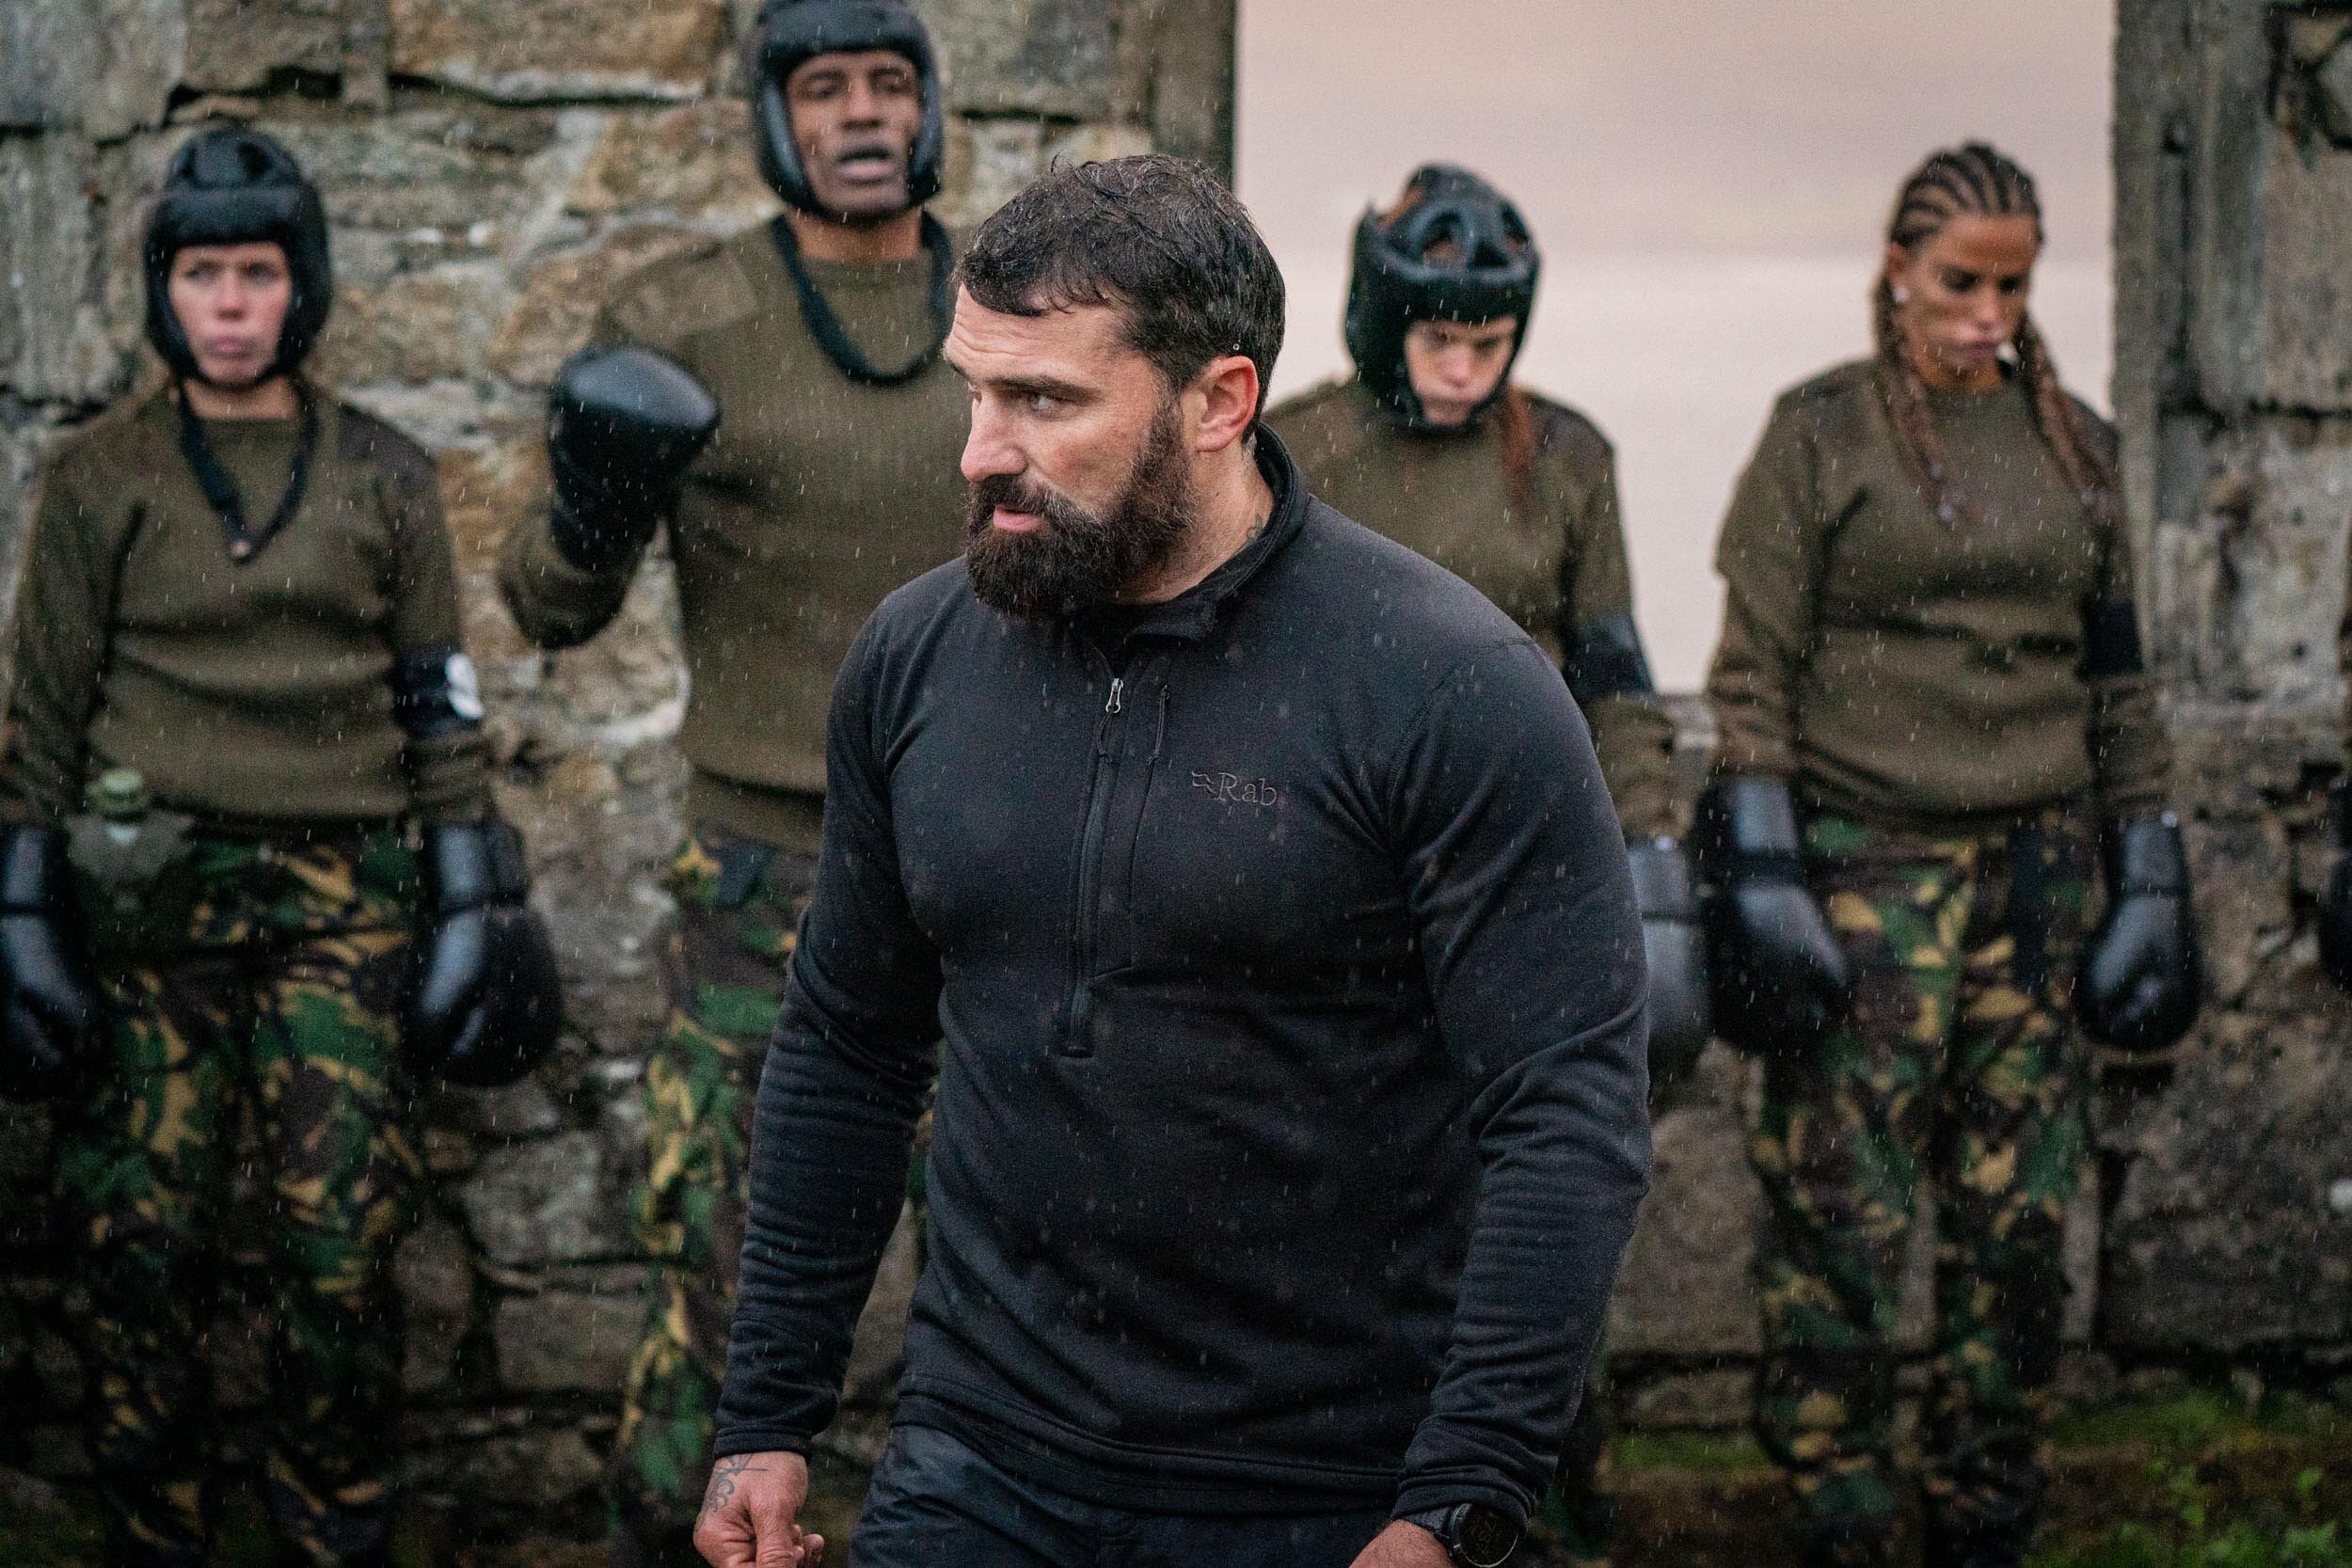  Chief Instructor Ant Middleton  Episode 2  Minnow Films / Channel 4 